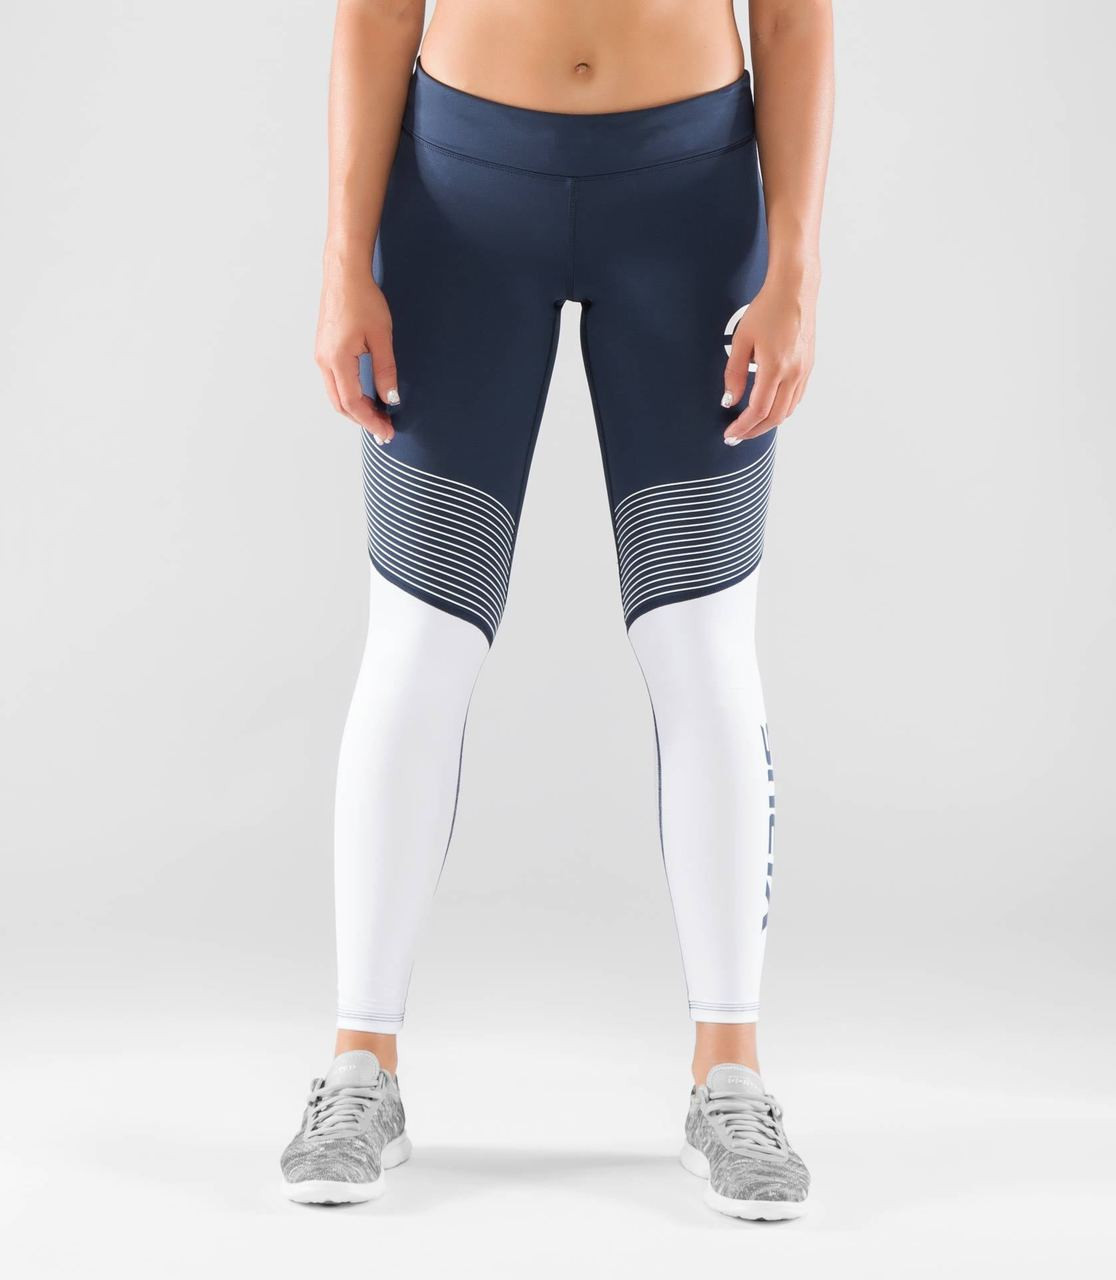 VIRUS WOMEN'S STAY COOL V2 COMPRESSION PANT (ECO21.5)- NAVY/WHITE - Battle  Box HQ